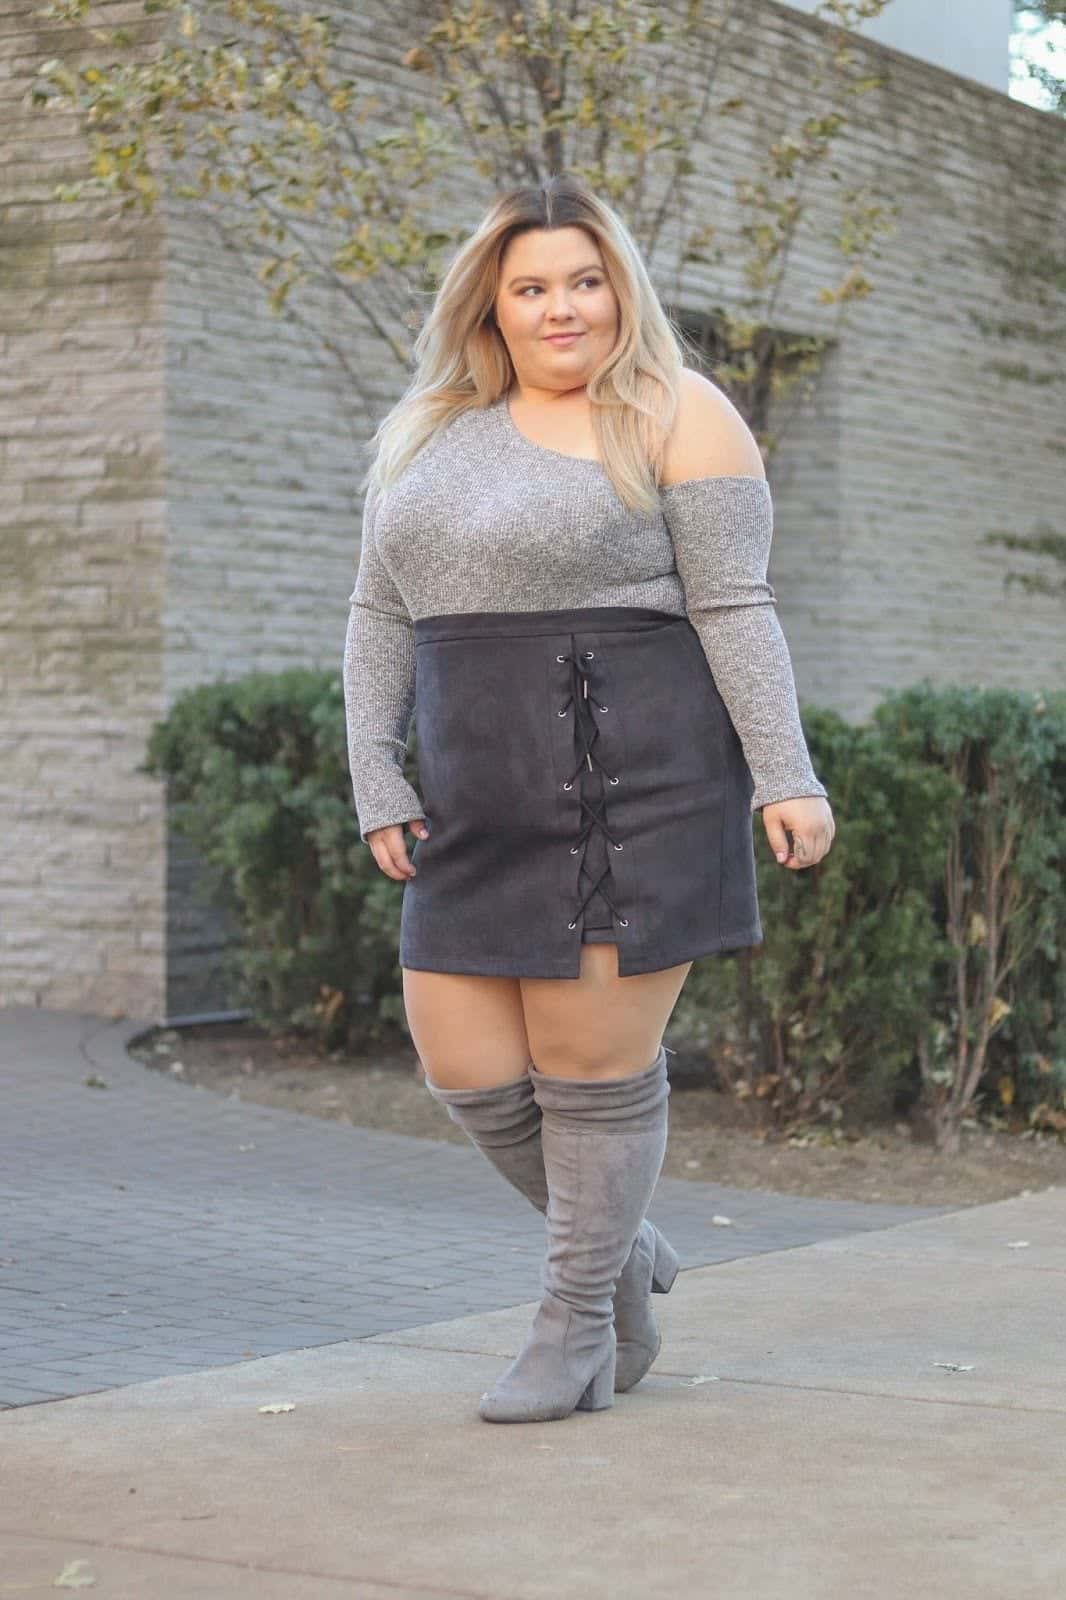 20 Best Plus Size Outfits To Wear With Thigh High Boots